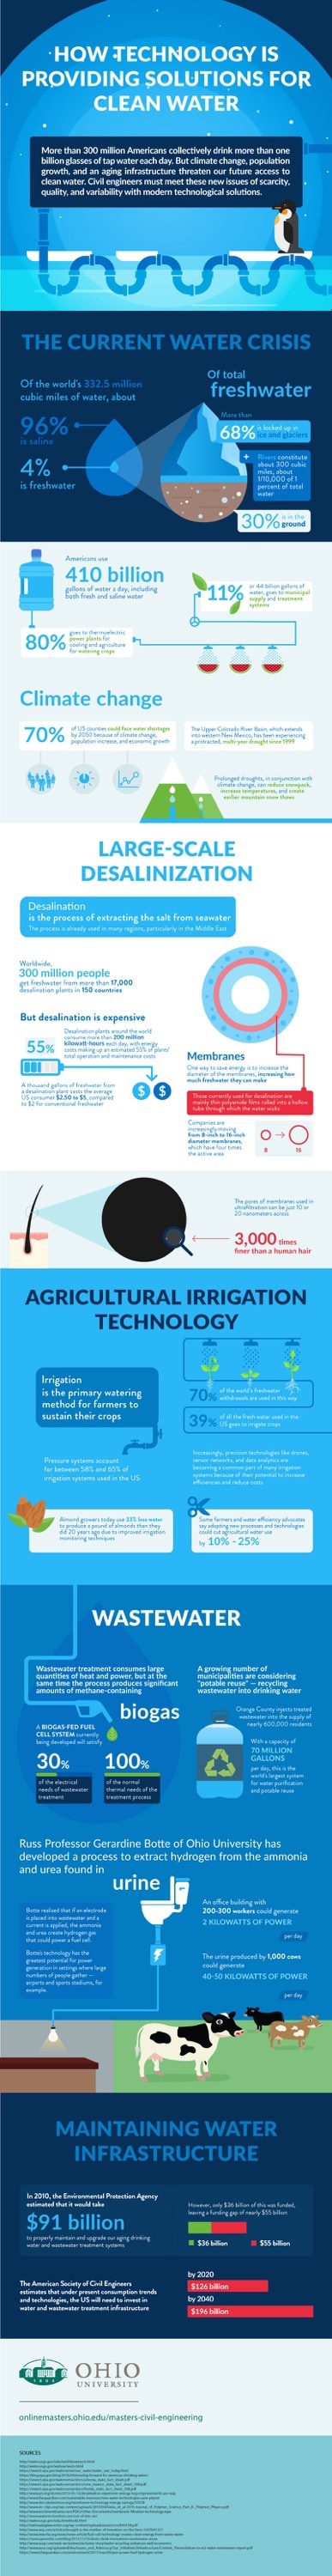 Technology solutions to make clean water